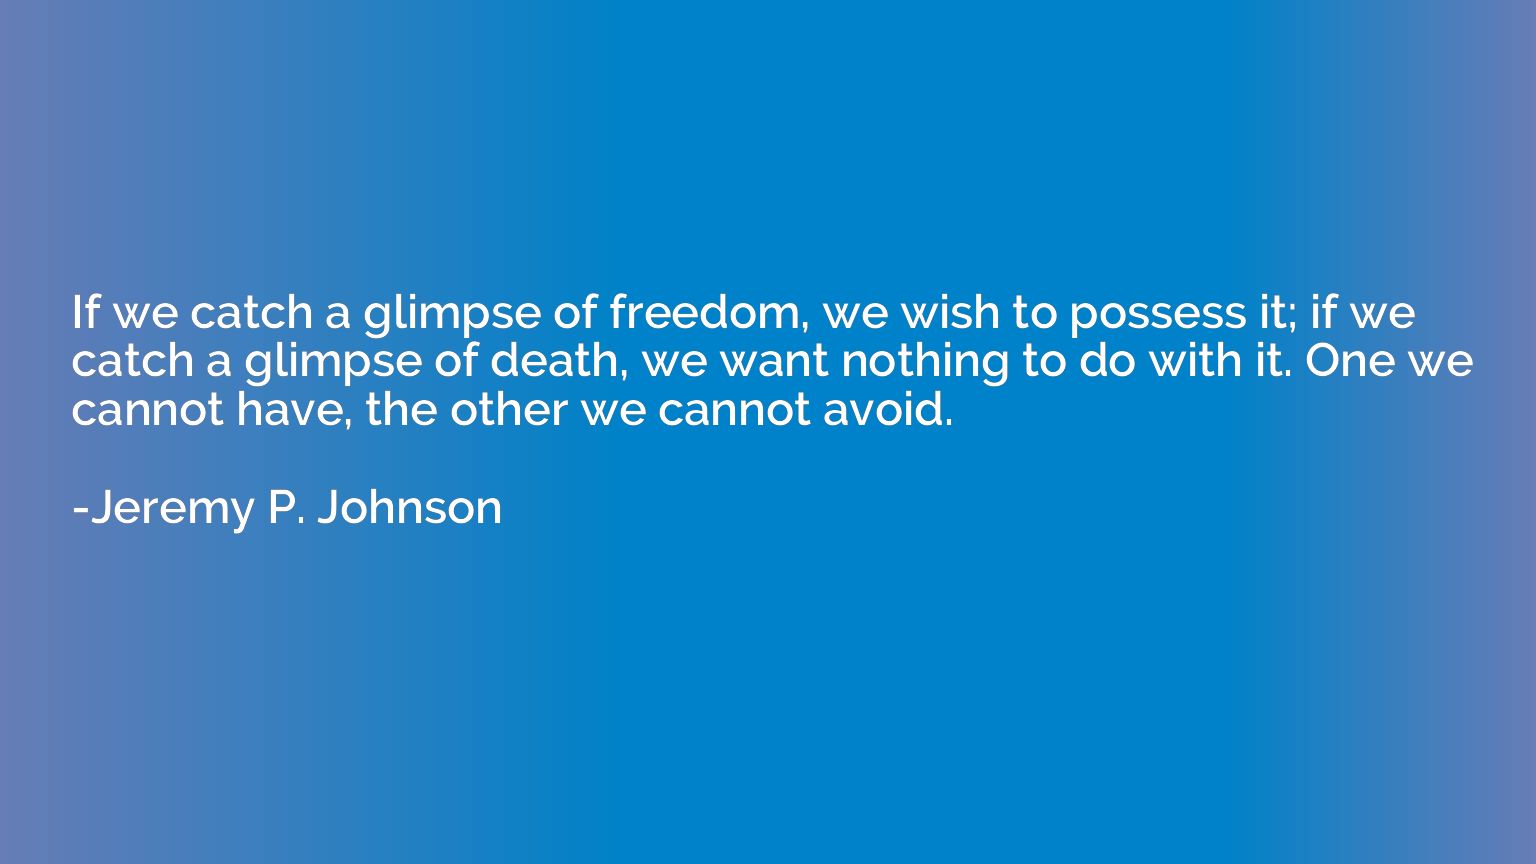 If we catch a glimpse of freedom, we wish to possess it; if 